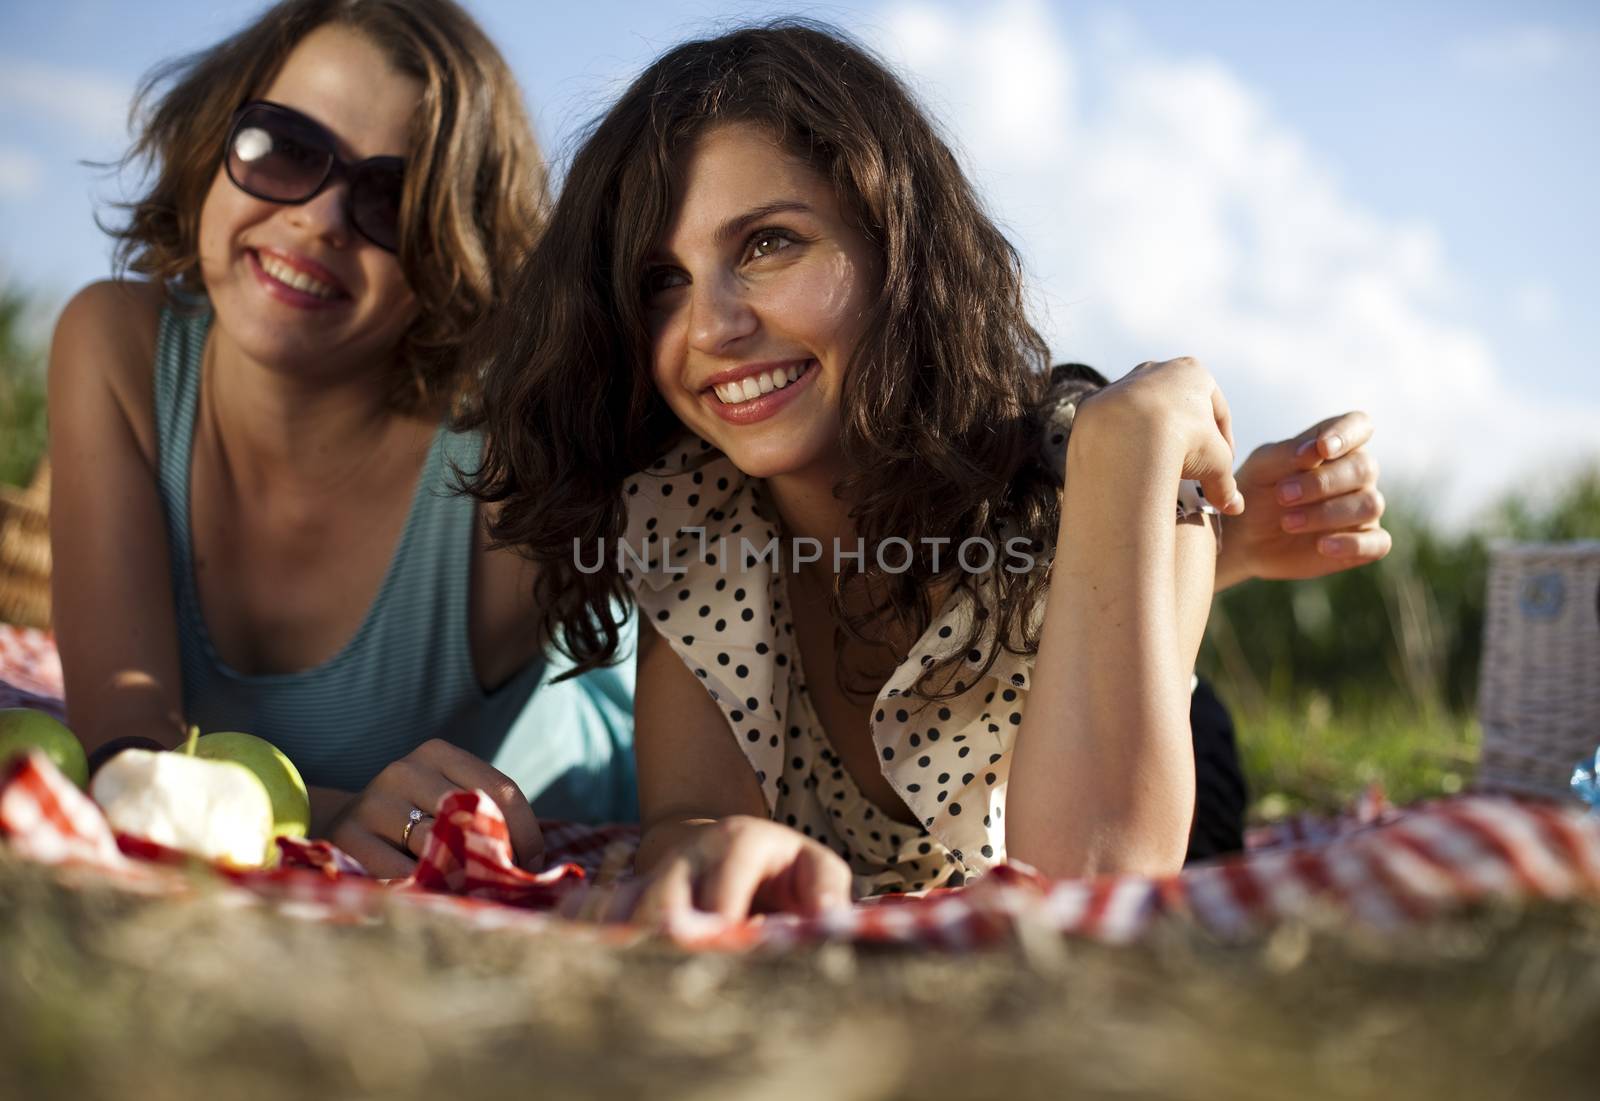 Picnic, summer free time spending by JanPietruszka